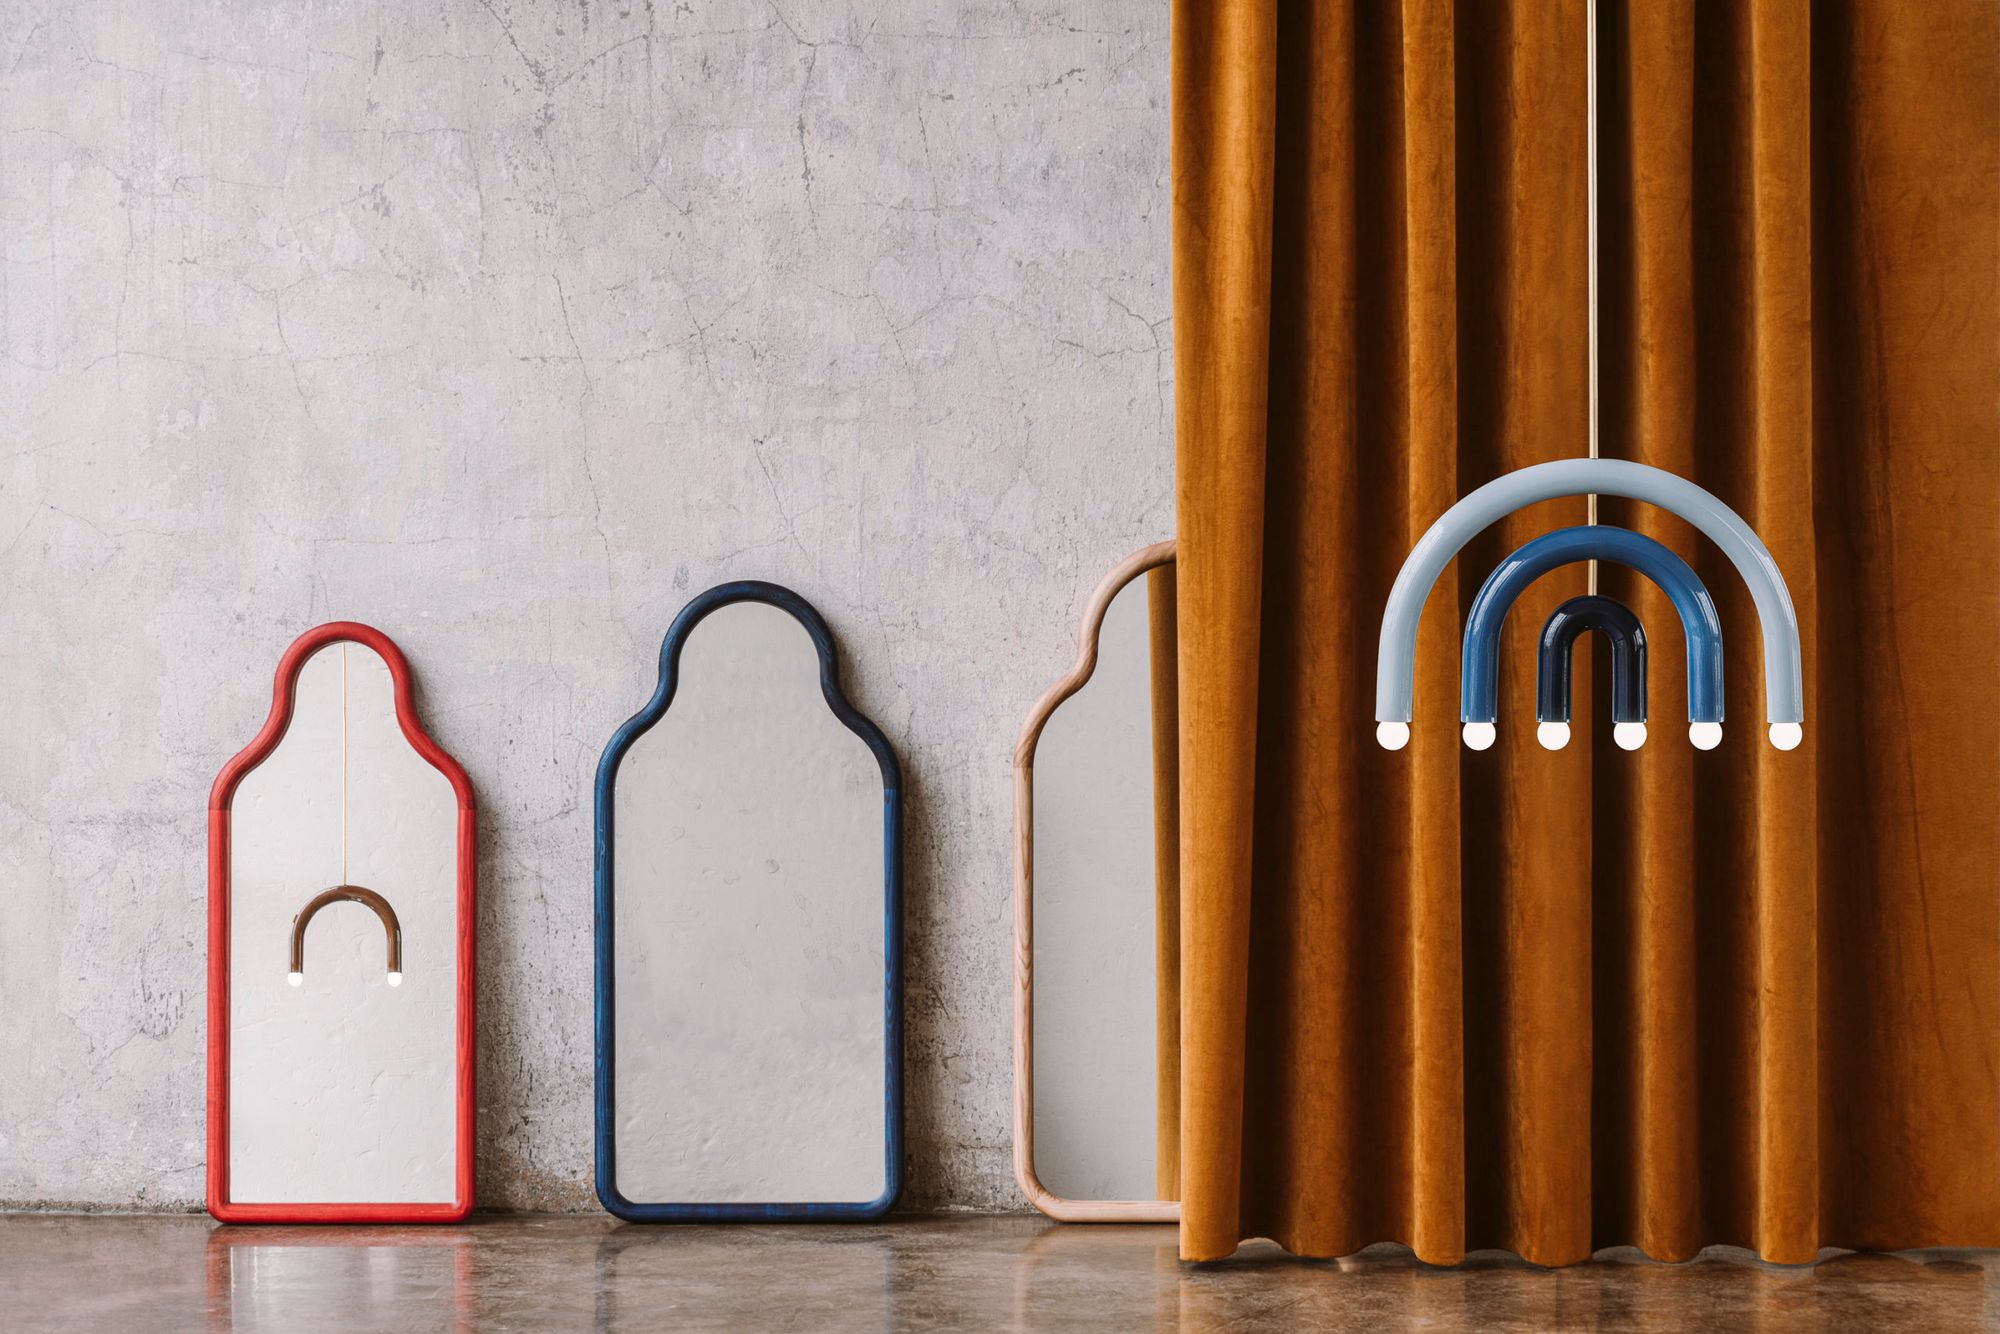 TRN Collection by Pani Jurek | Conceptual furniture from Poland